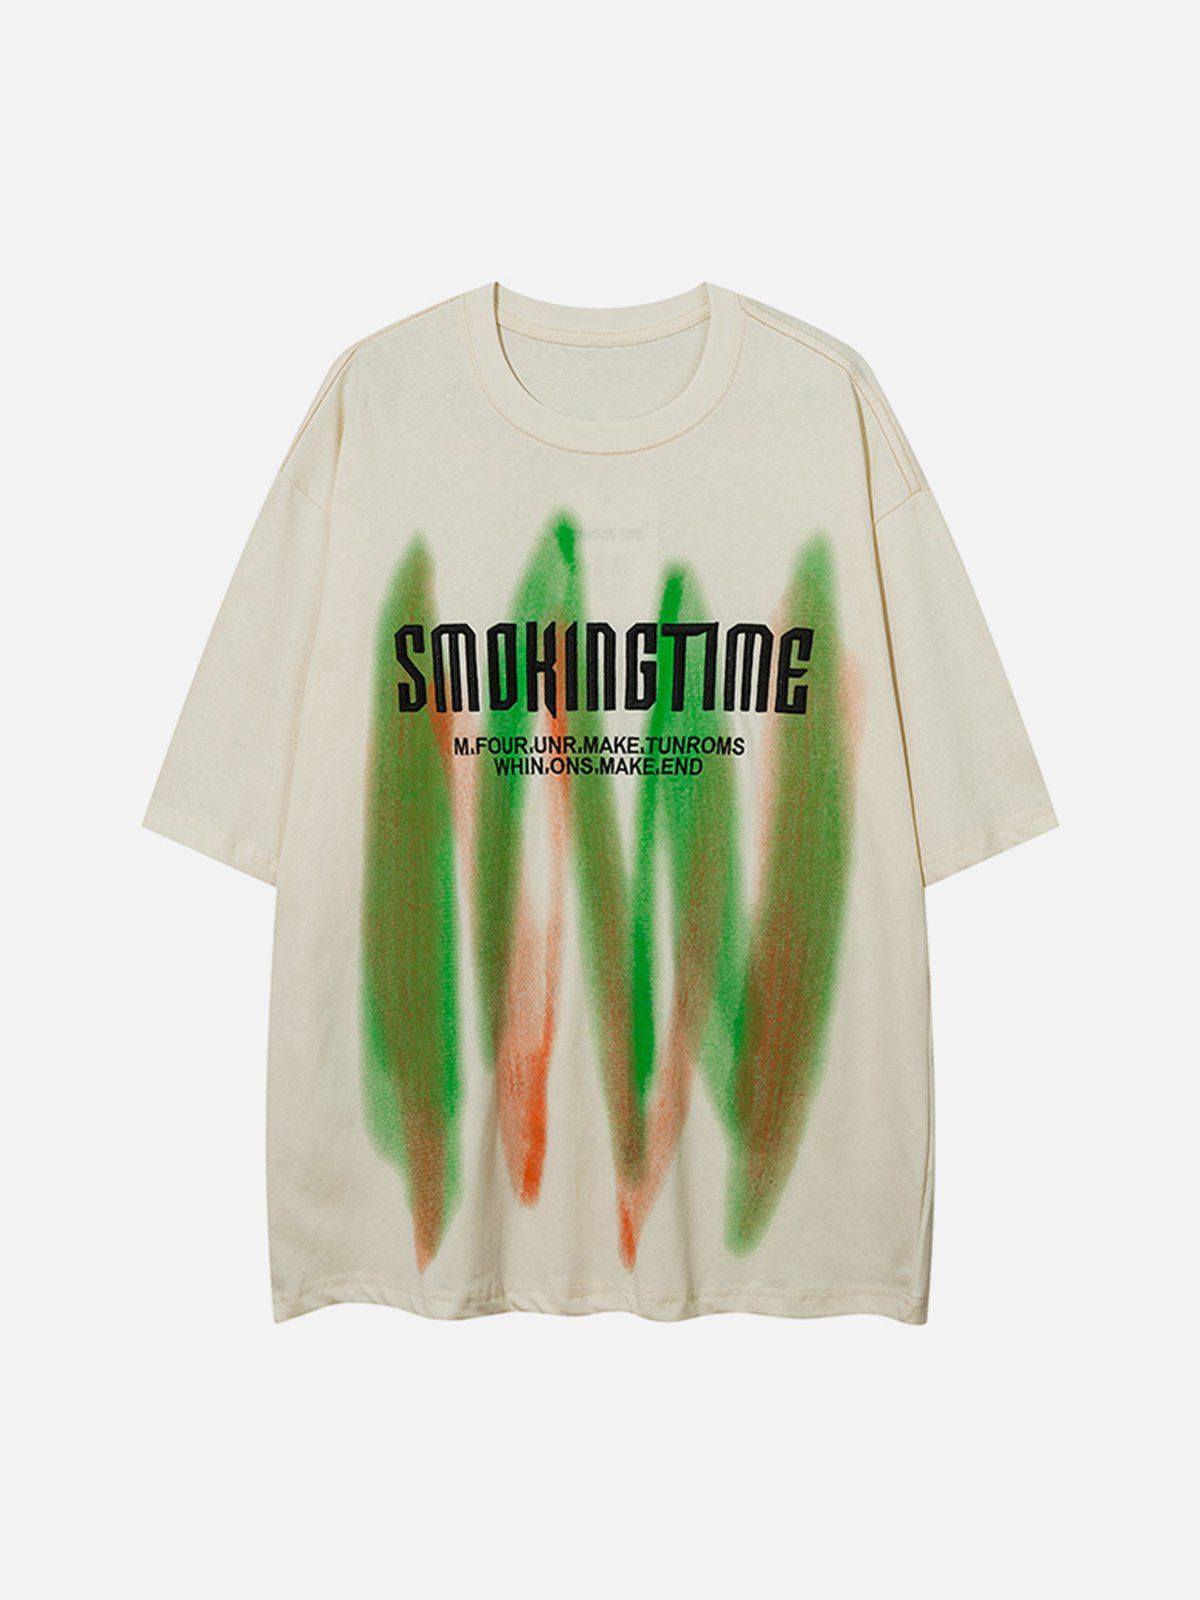 Sneakerland™ - Abstraction Print Tee